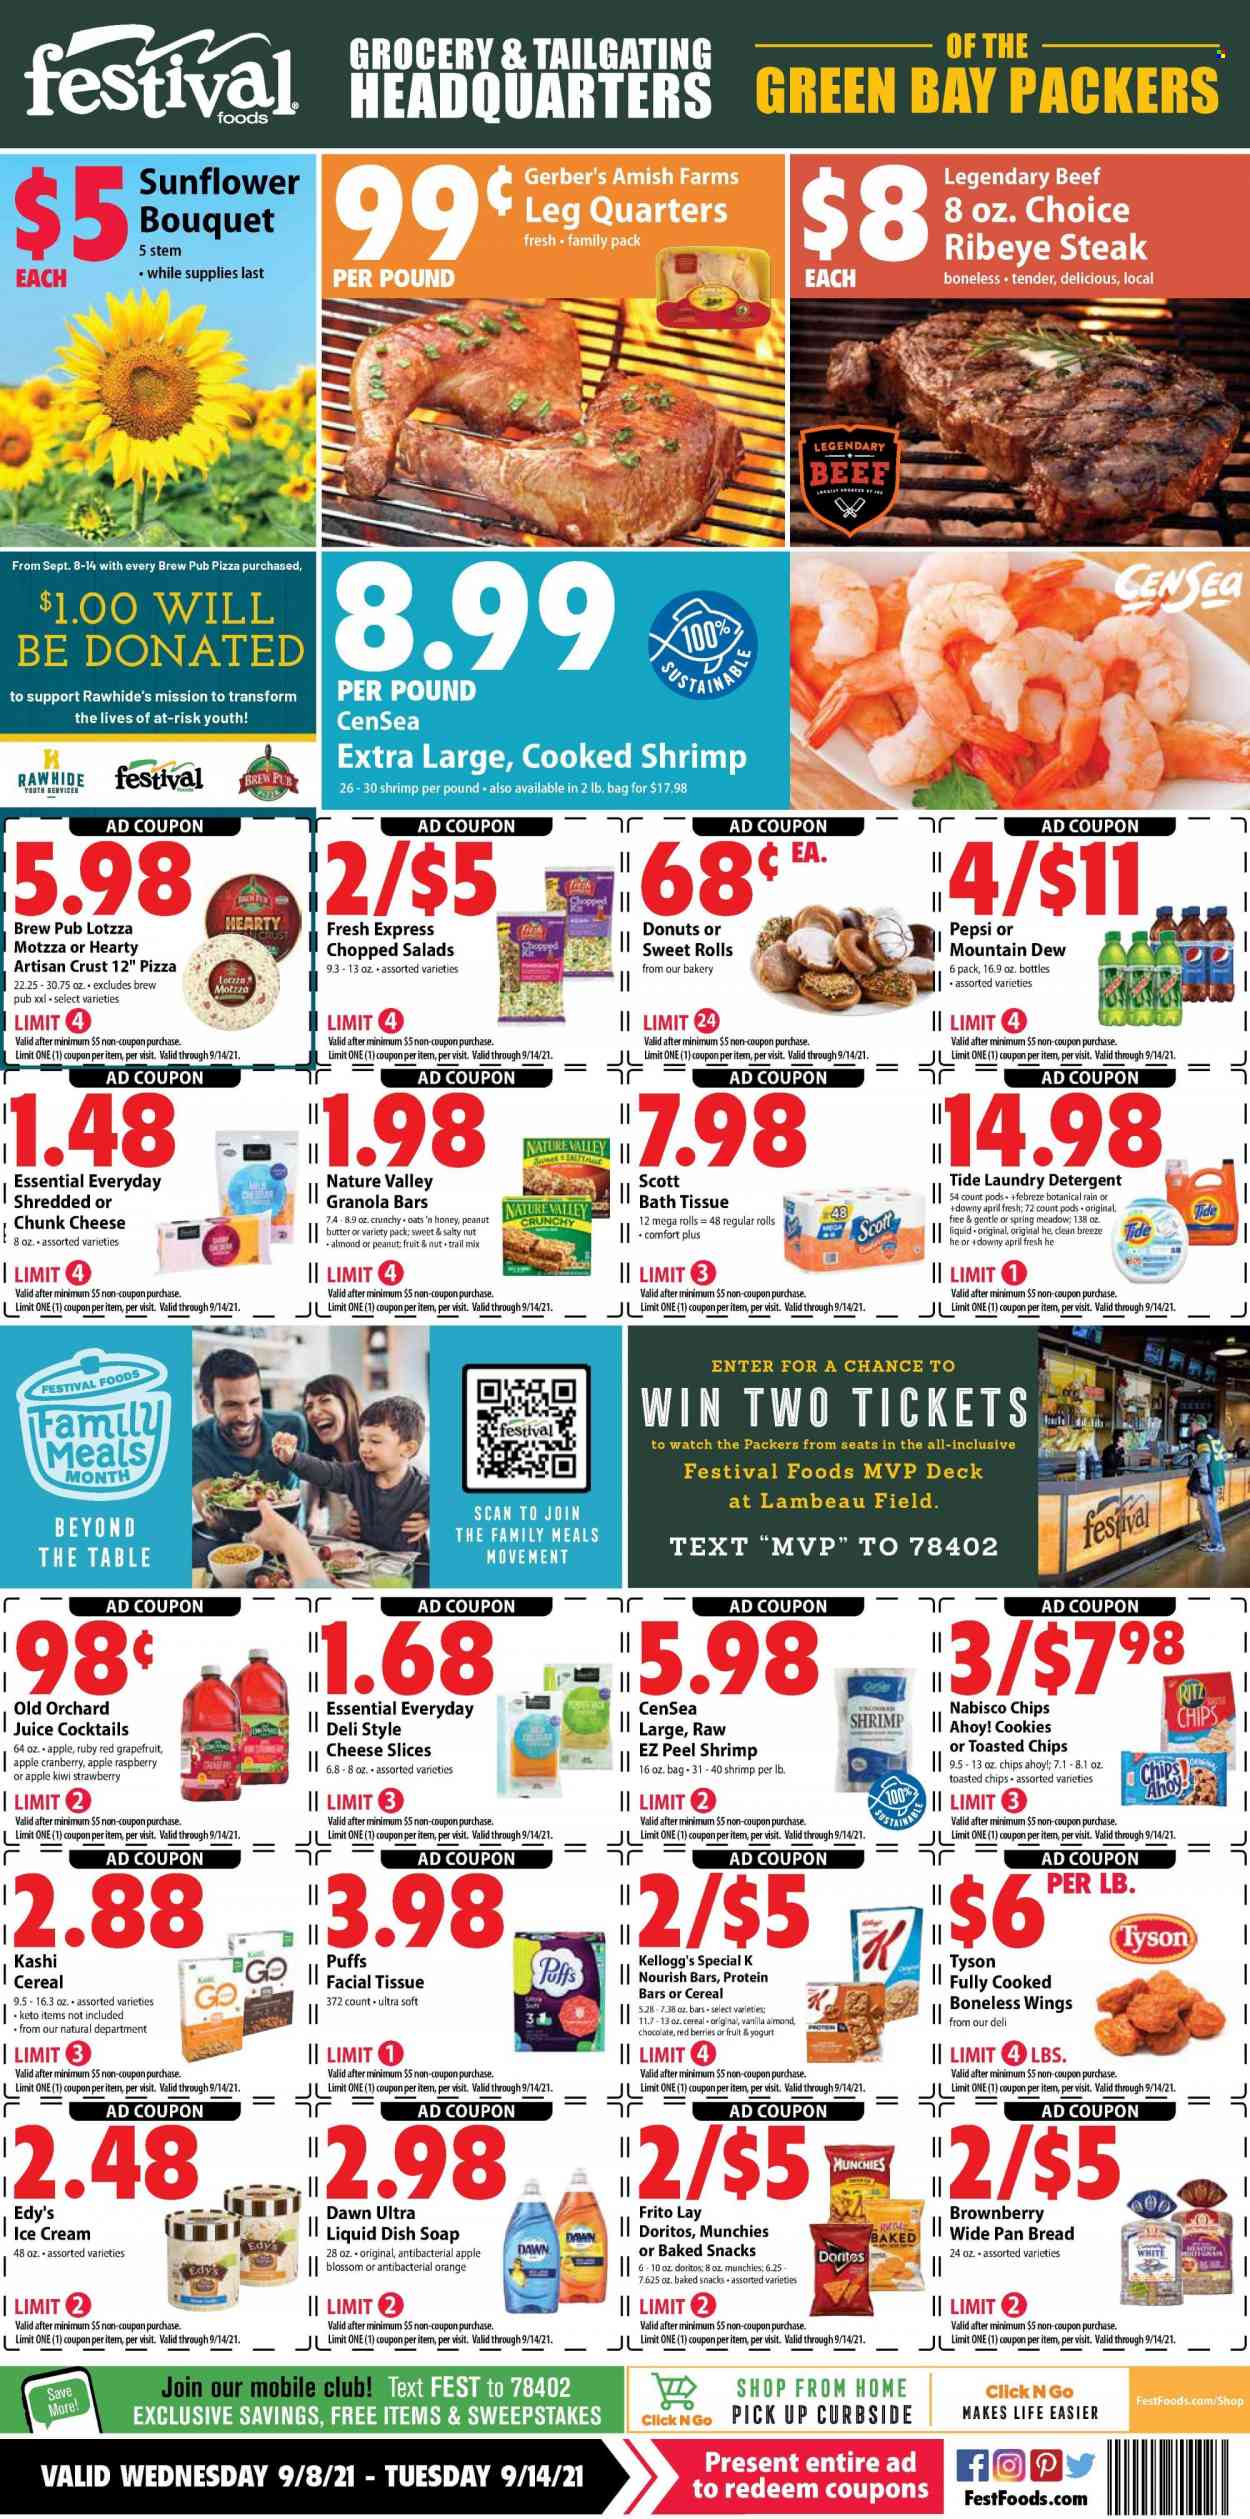 thumbnail - Festival Foods Flyer - 09/08/2021 - 09/14/2021 - Sales products - bread, puffs, donut, sweet rolls, chopped salad, kiwi, oranges, shrimps, pizza, sliced cheese, chunk cheese, yoghurt, butter, Blossom, ice cream, cookies, snack, Kellogg's, Chips Ahoy!, RITZ, Doritos, chips, granola bar, Nature Valley, trail mix, Mountain Dew, Pepsi, juice, beef meat, beef steak, steak, ribeye steak, bath tissue, Scott, detergent, Febreze, Tide, laundry detergent, soap. Page 1.